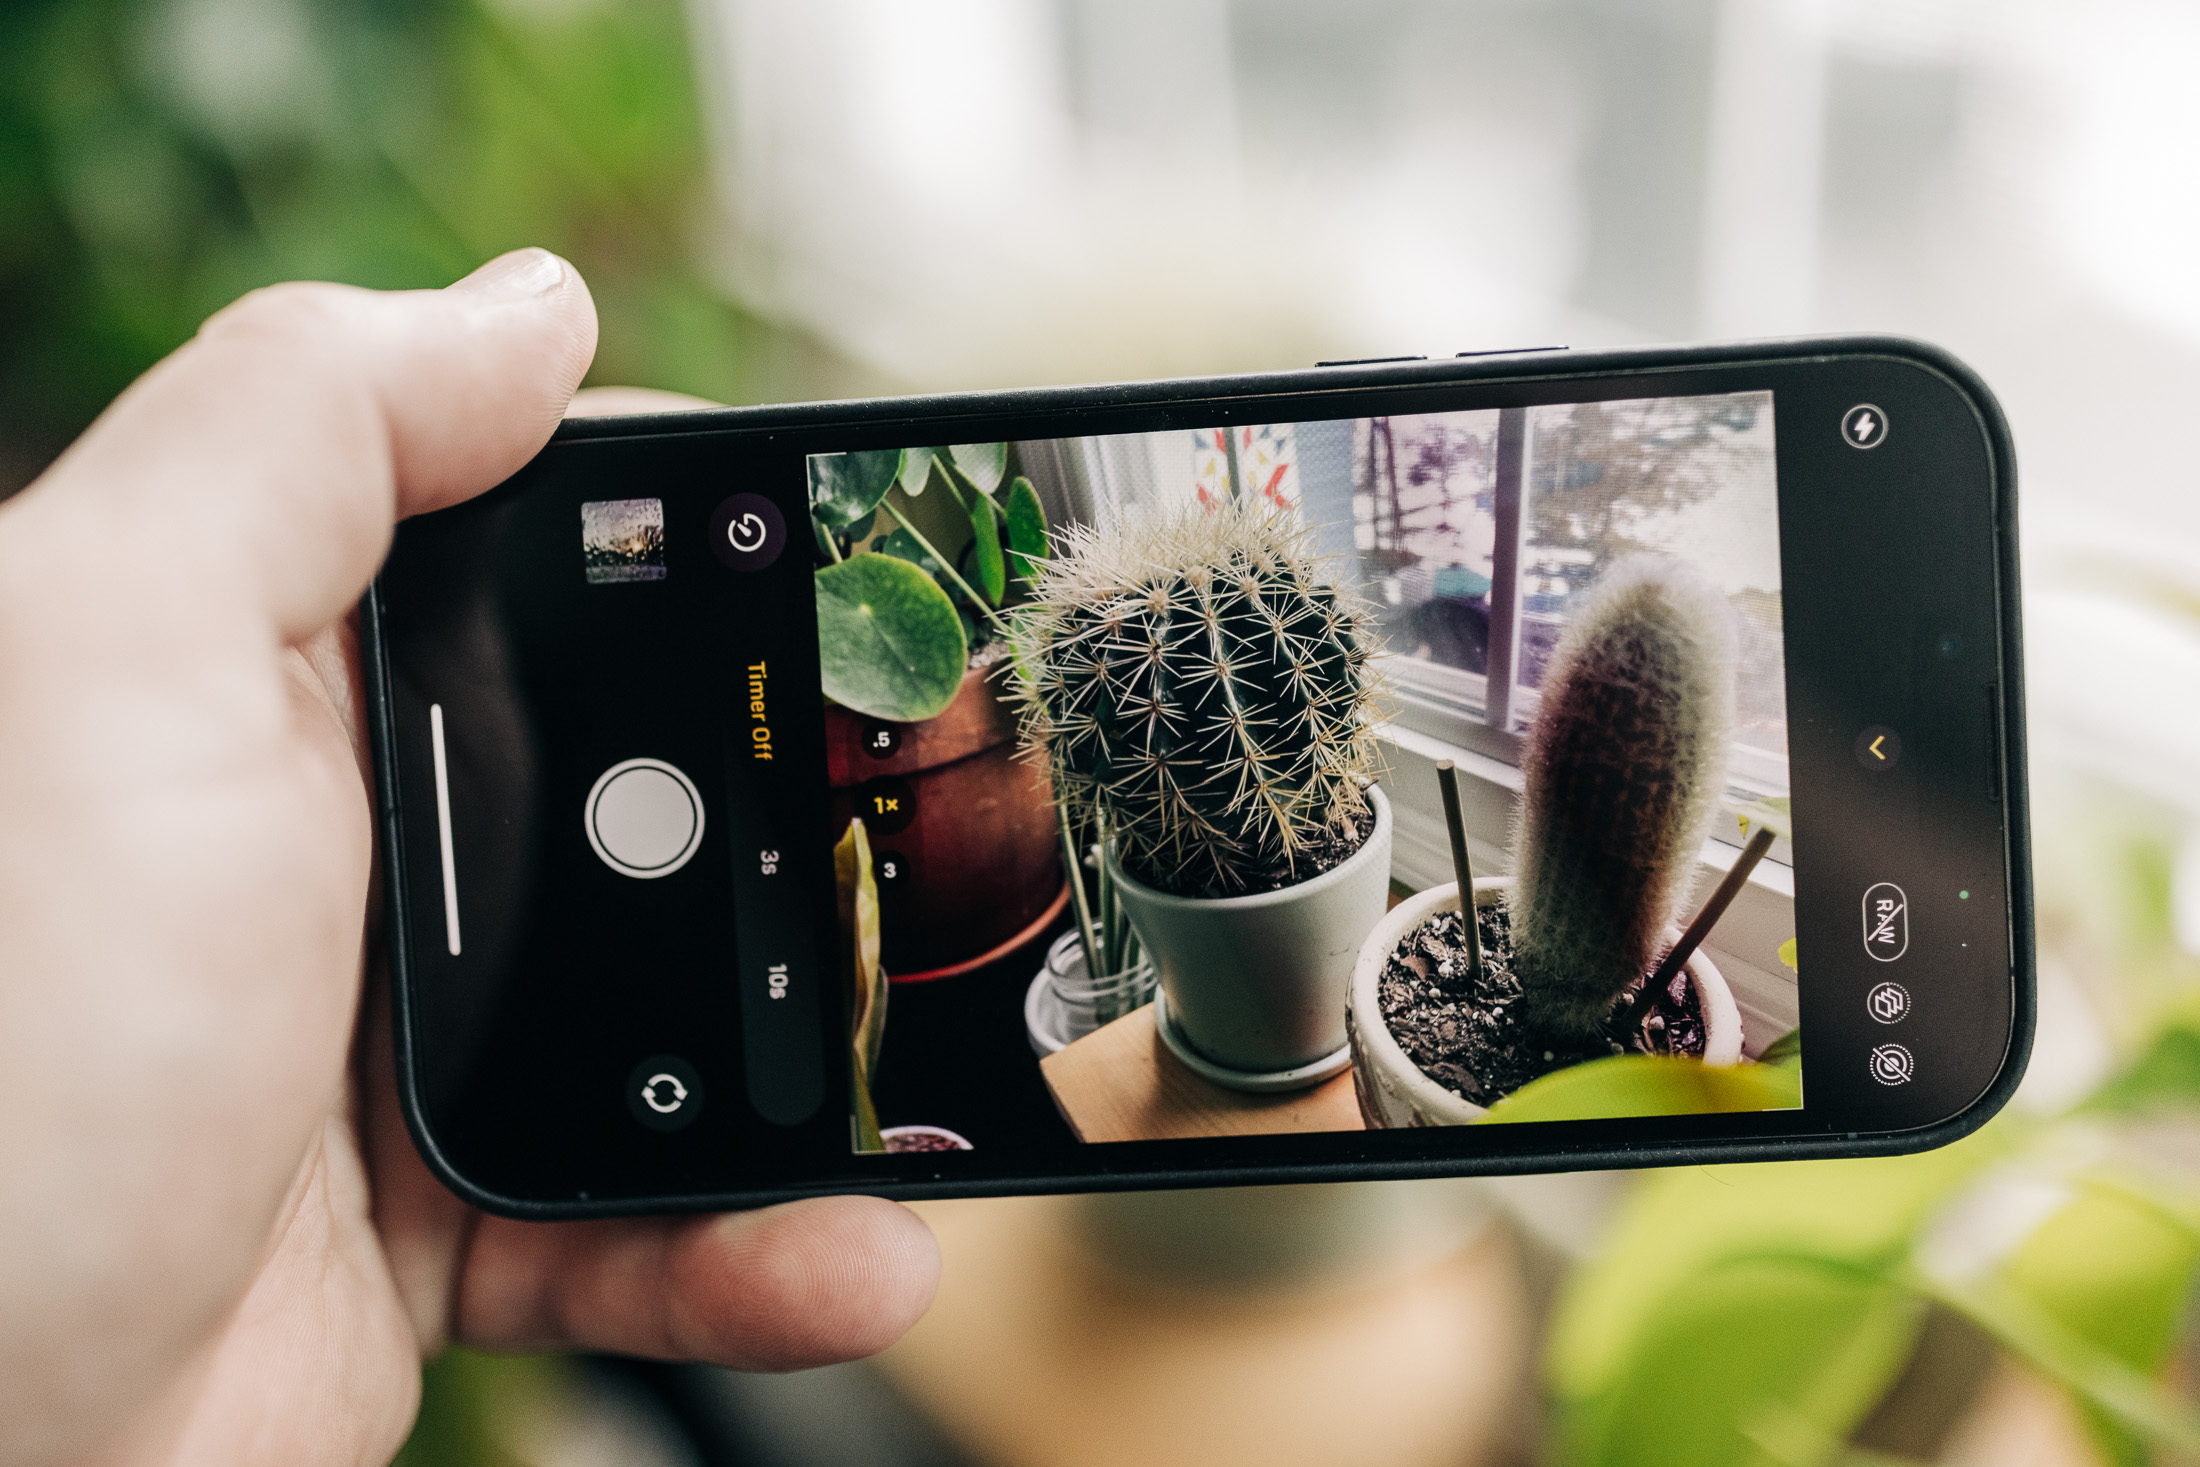 How to set a timer on your iPhone camera